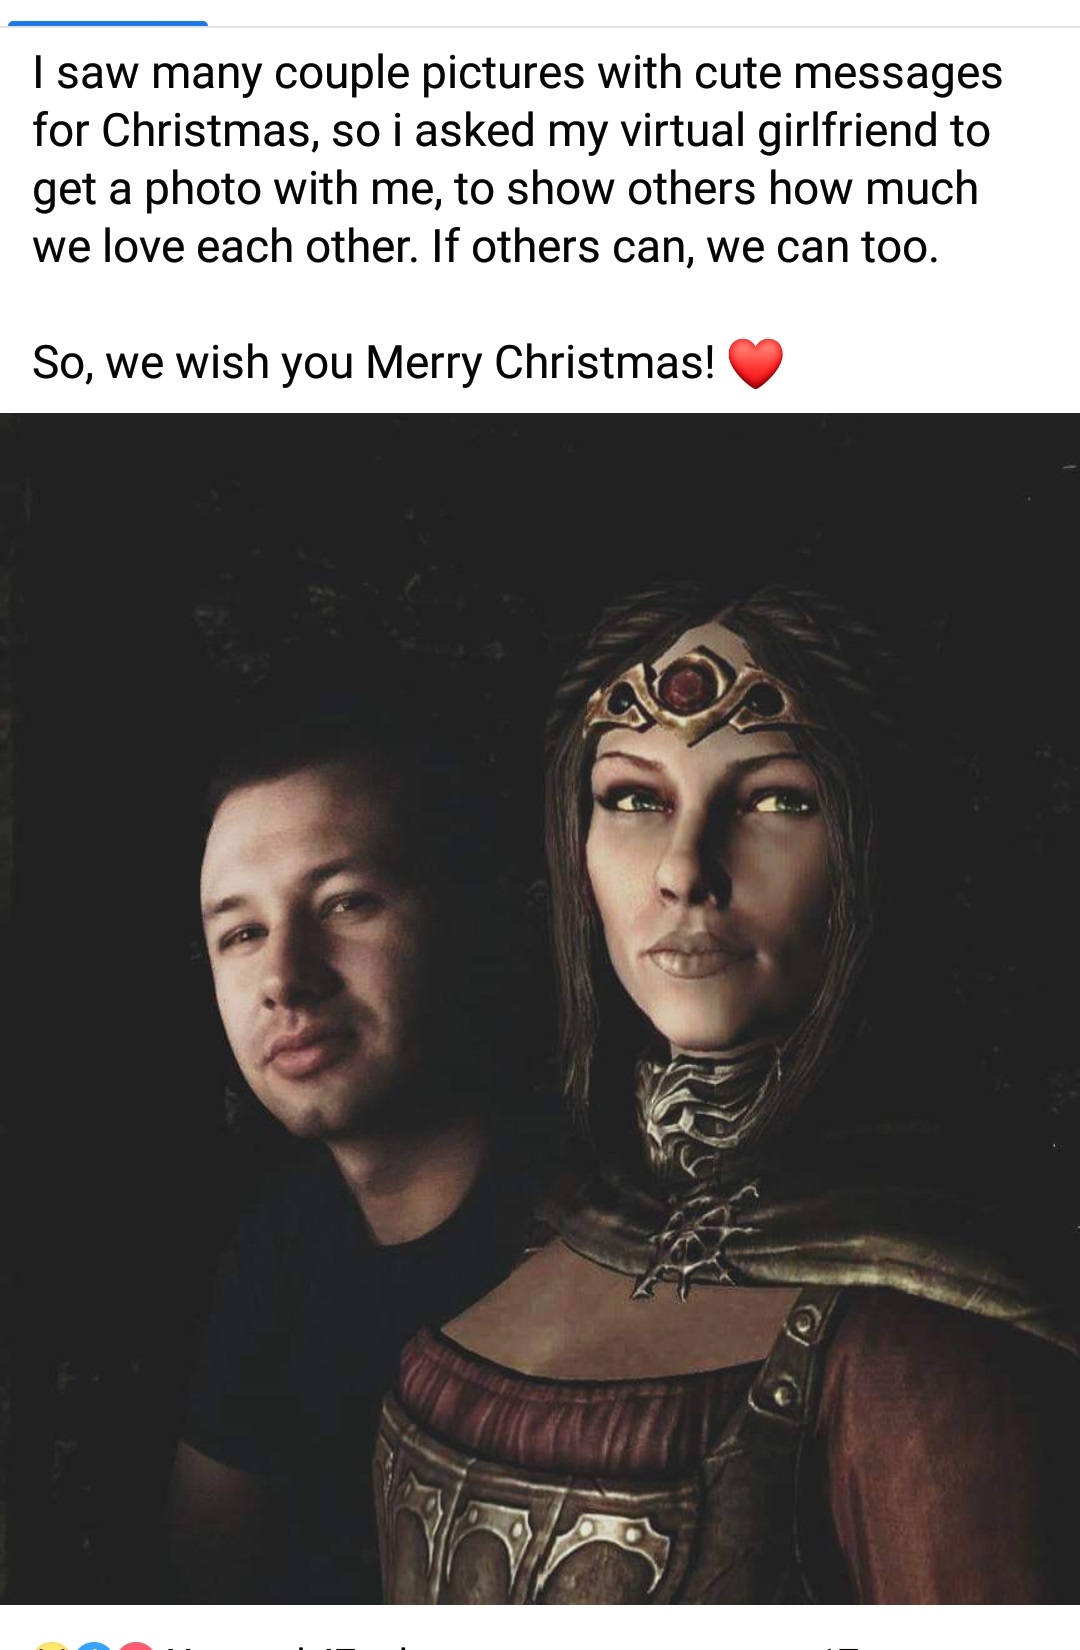 poster - I saw many couple pictures with cute messages for Christmas, so i asked my virtual girlfriend to get a photo with me, to show others how much we love each other. If others can, we can too. So, we wish you Merry Christmas!